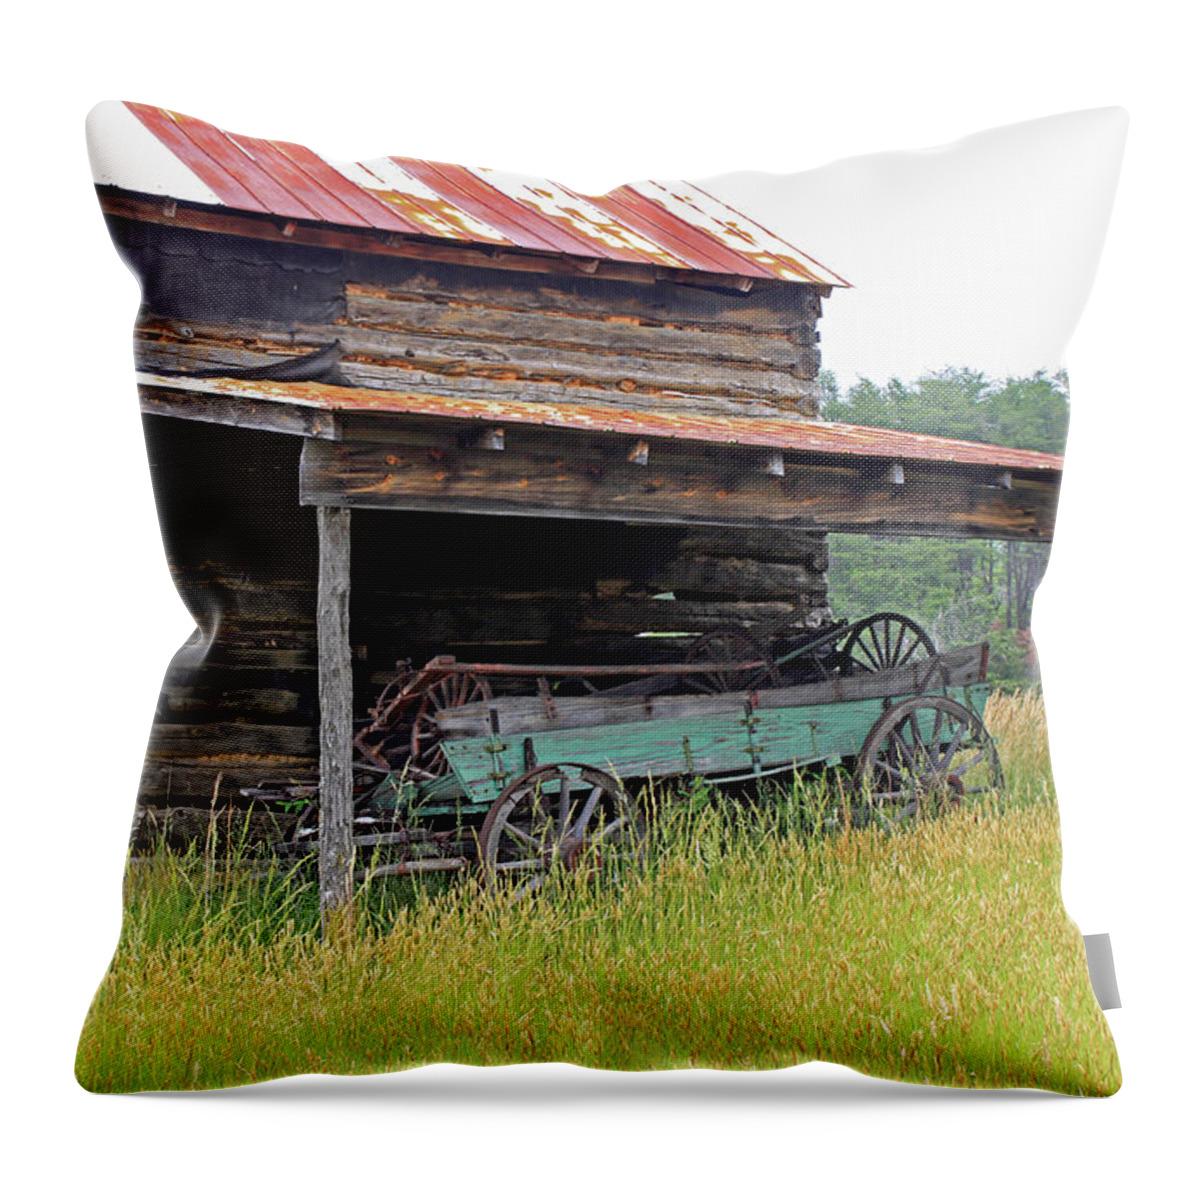 Barn Throw Pillow featuring the photograph Another Time III by Suzanne Gaff